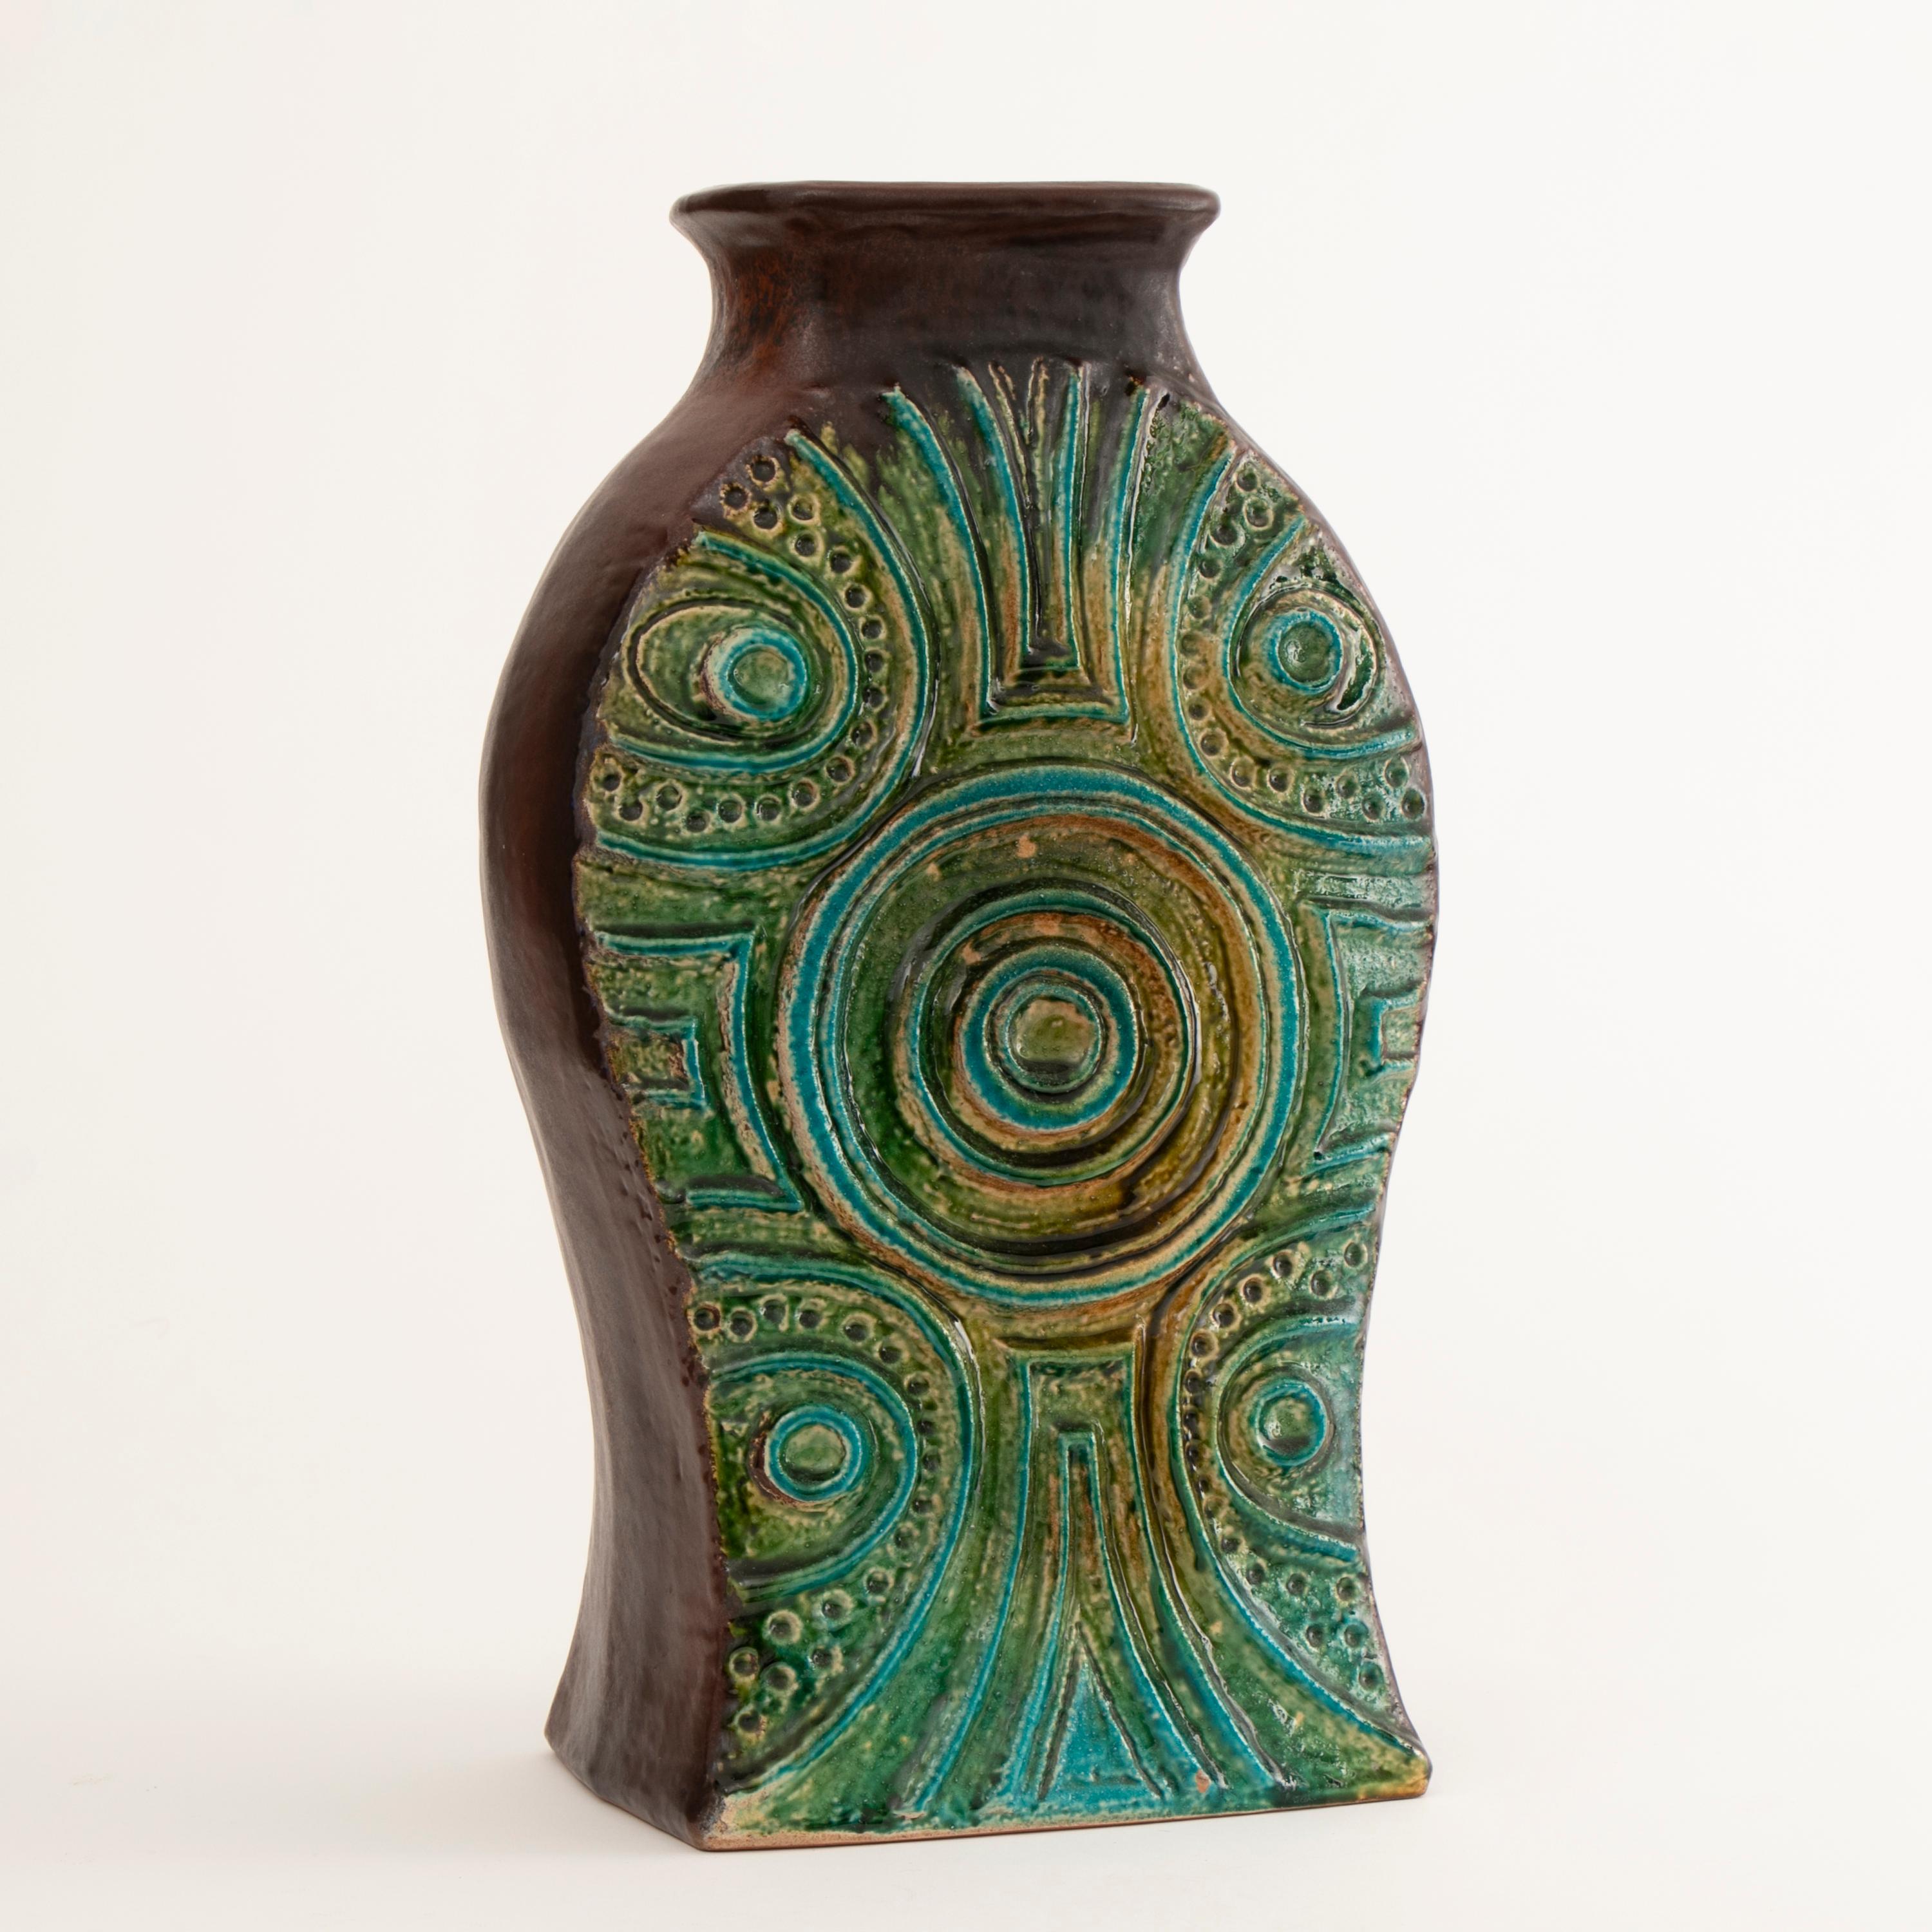 1970s West German pottery vase with a green, blue and yellow abstract glaze to the textured front and back framed with brown sides and neck by Carstens Tonnieshof. Model No 7850-50.

Measures: H 50cm, W 29cm, D 21cm.